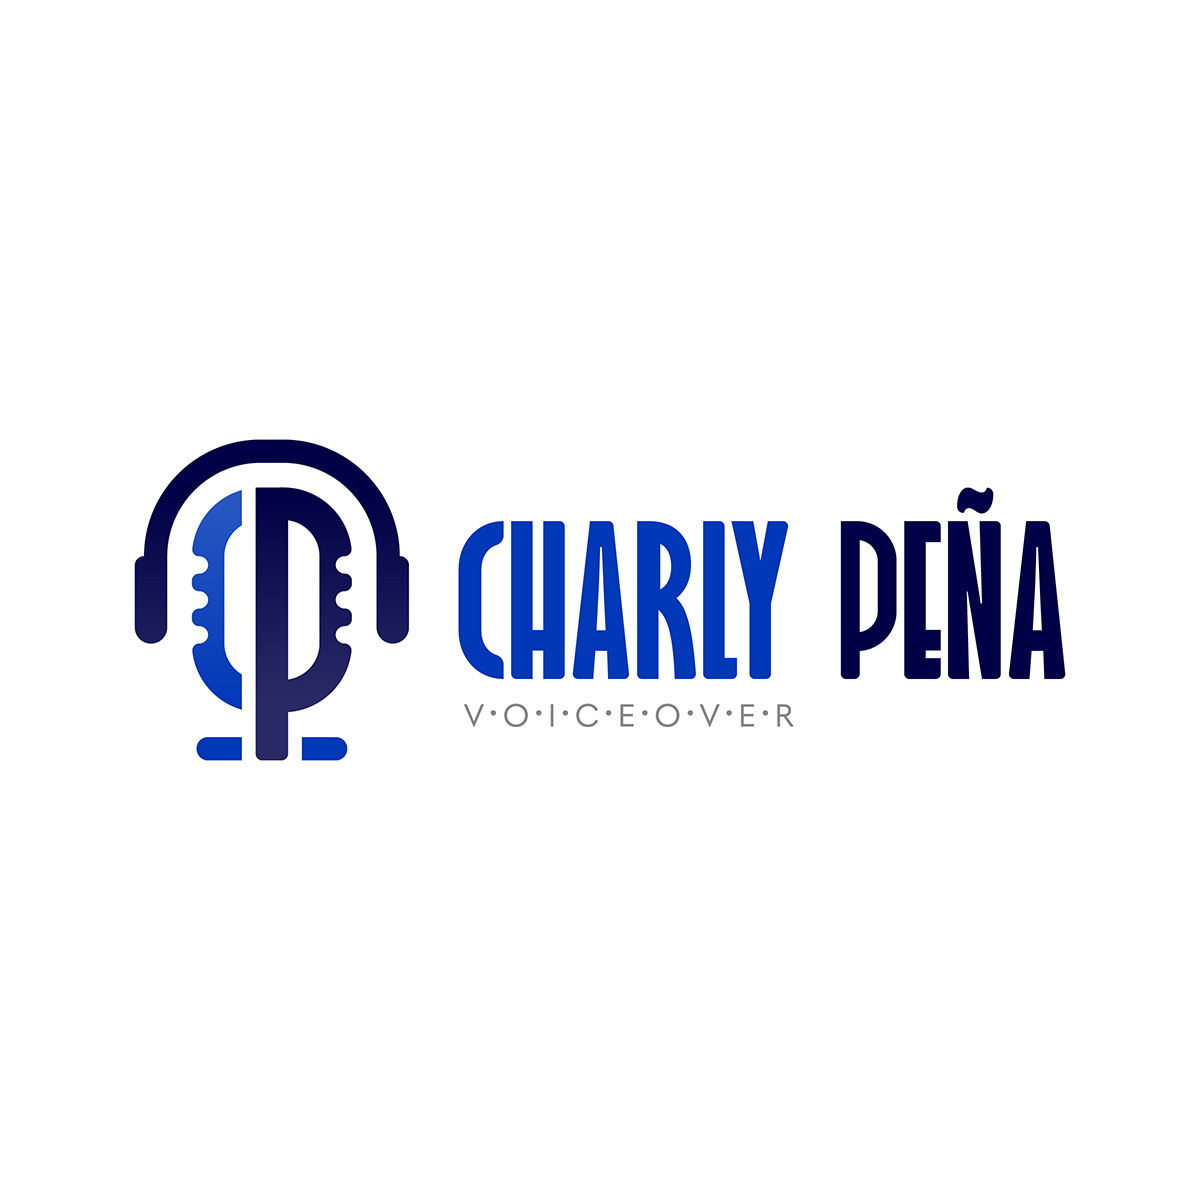 Charly Peña - Voice Over